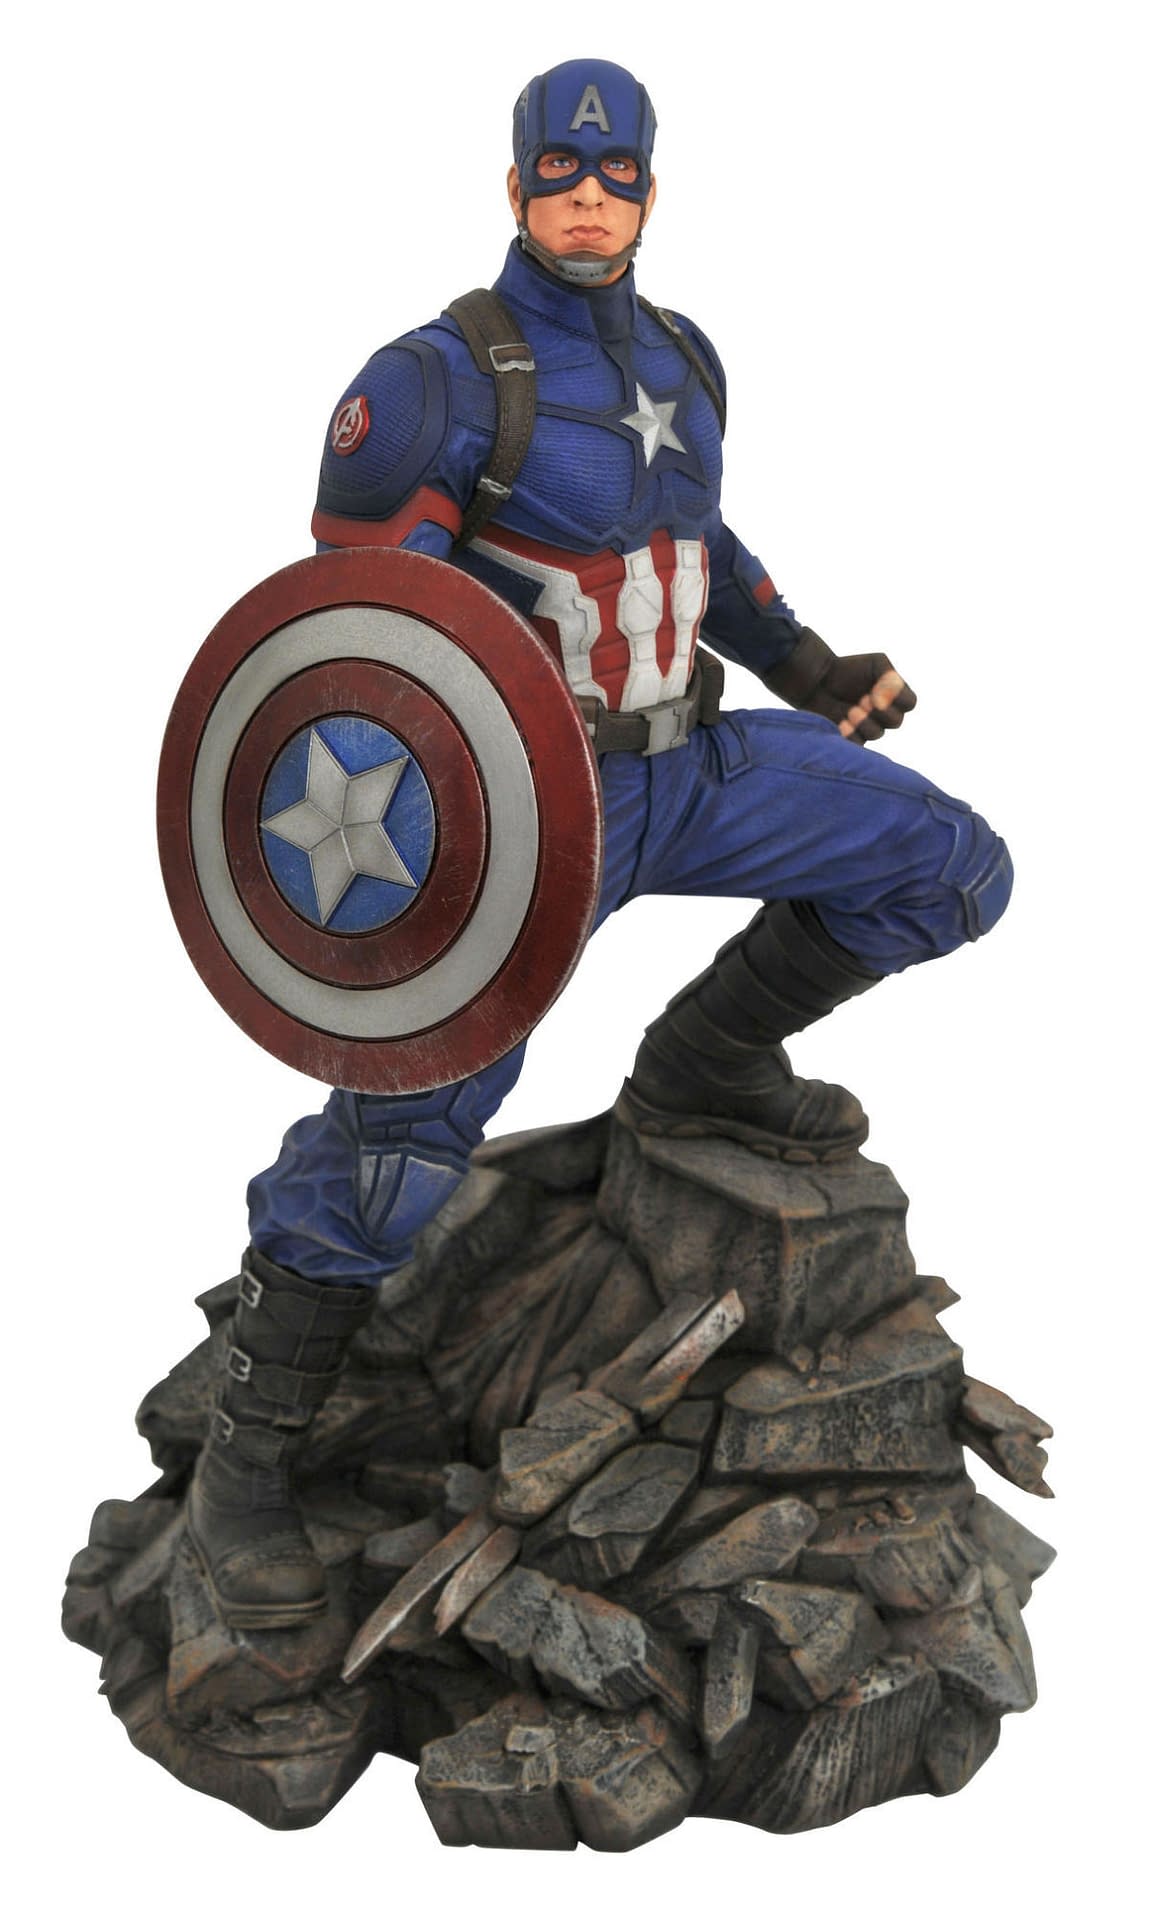 Diamond Select Toys Reveals Avengers: Endgame Gallery Statues and Minimates